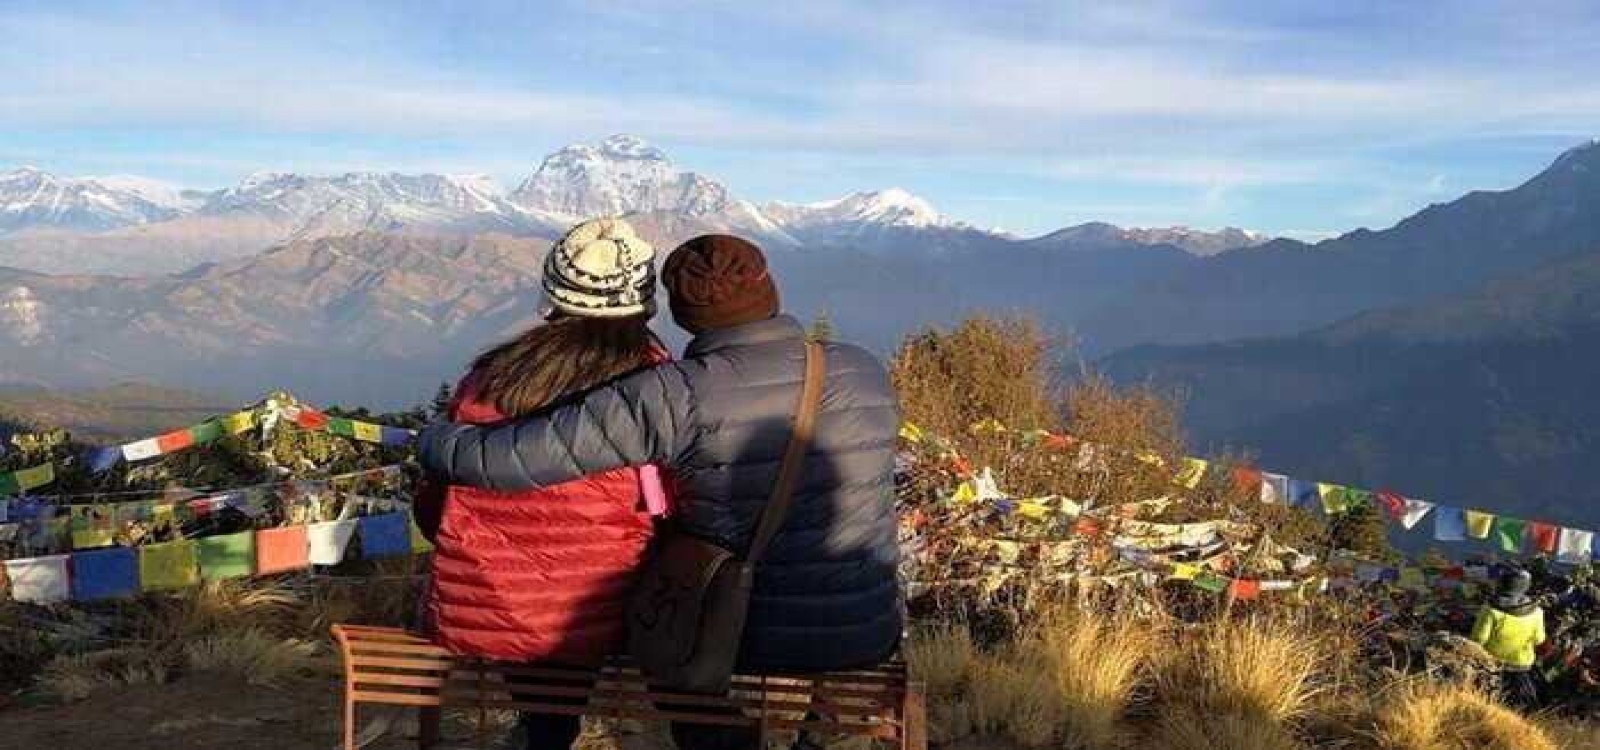 Nepal Family Tour Package - Nepal Tourism